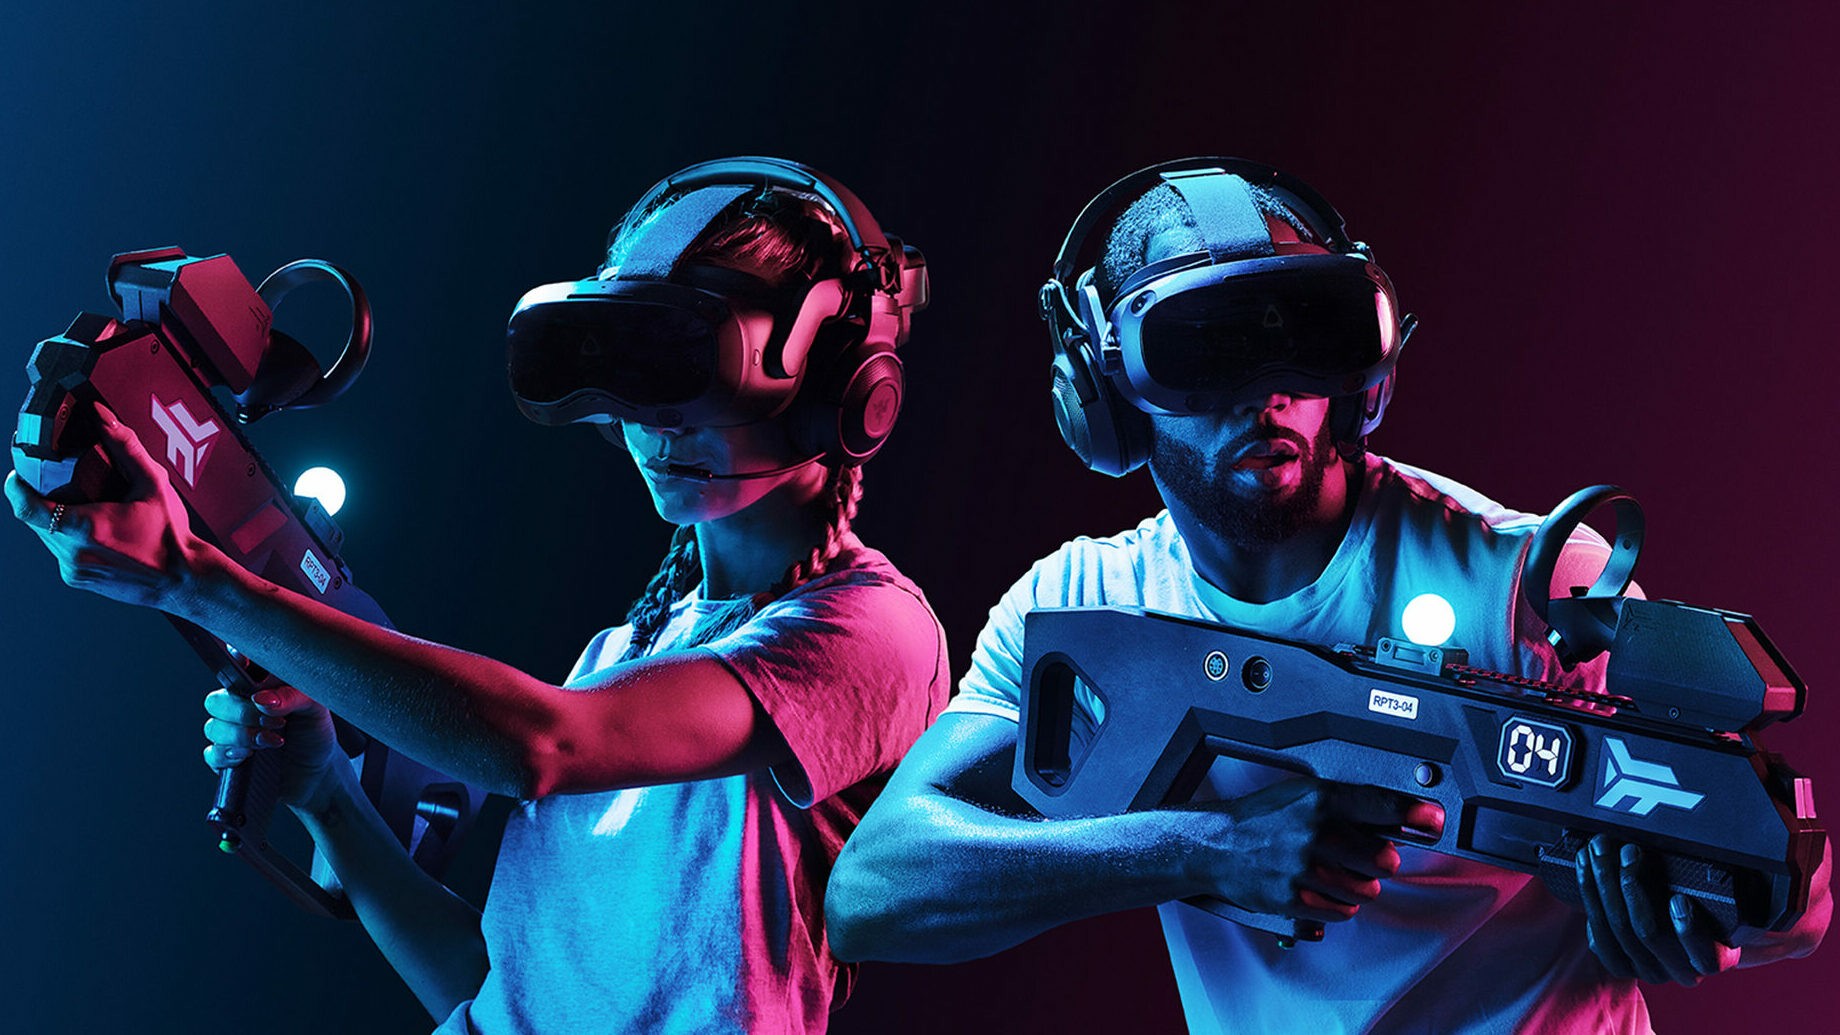 "Zero Latency": This is how the VR thrill plays